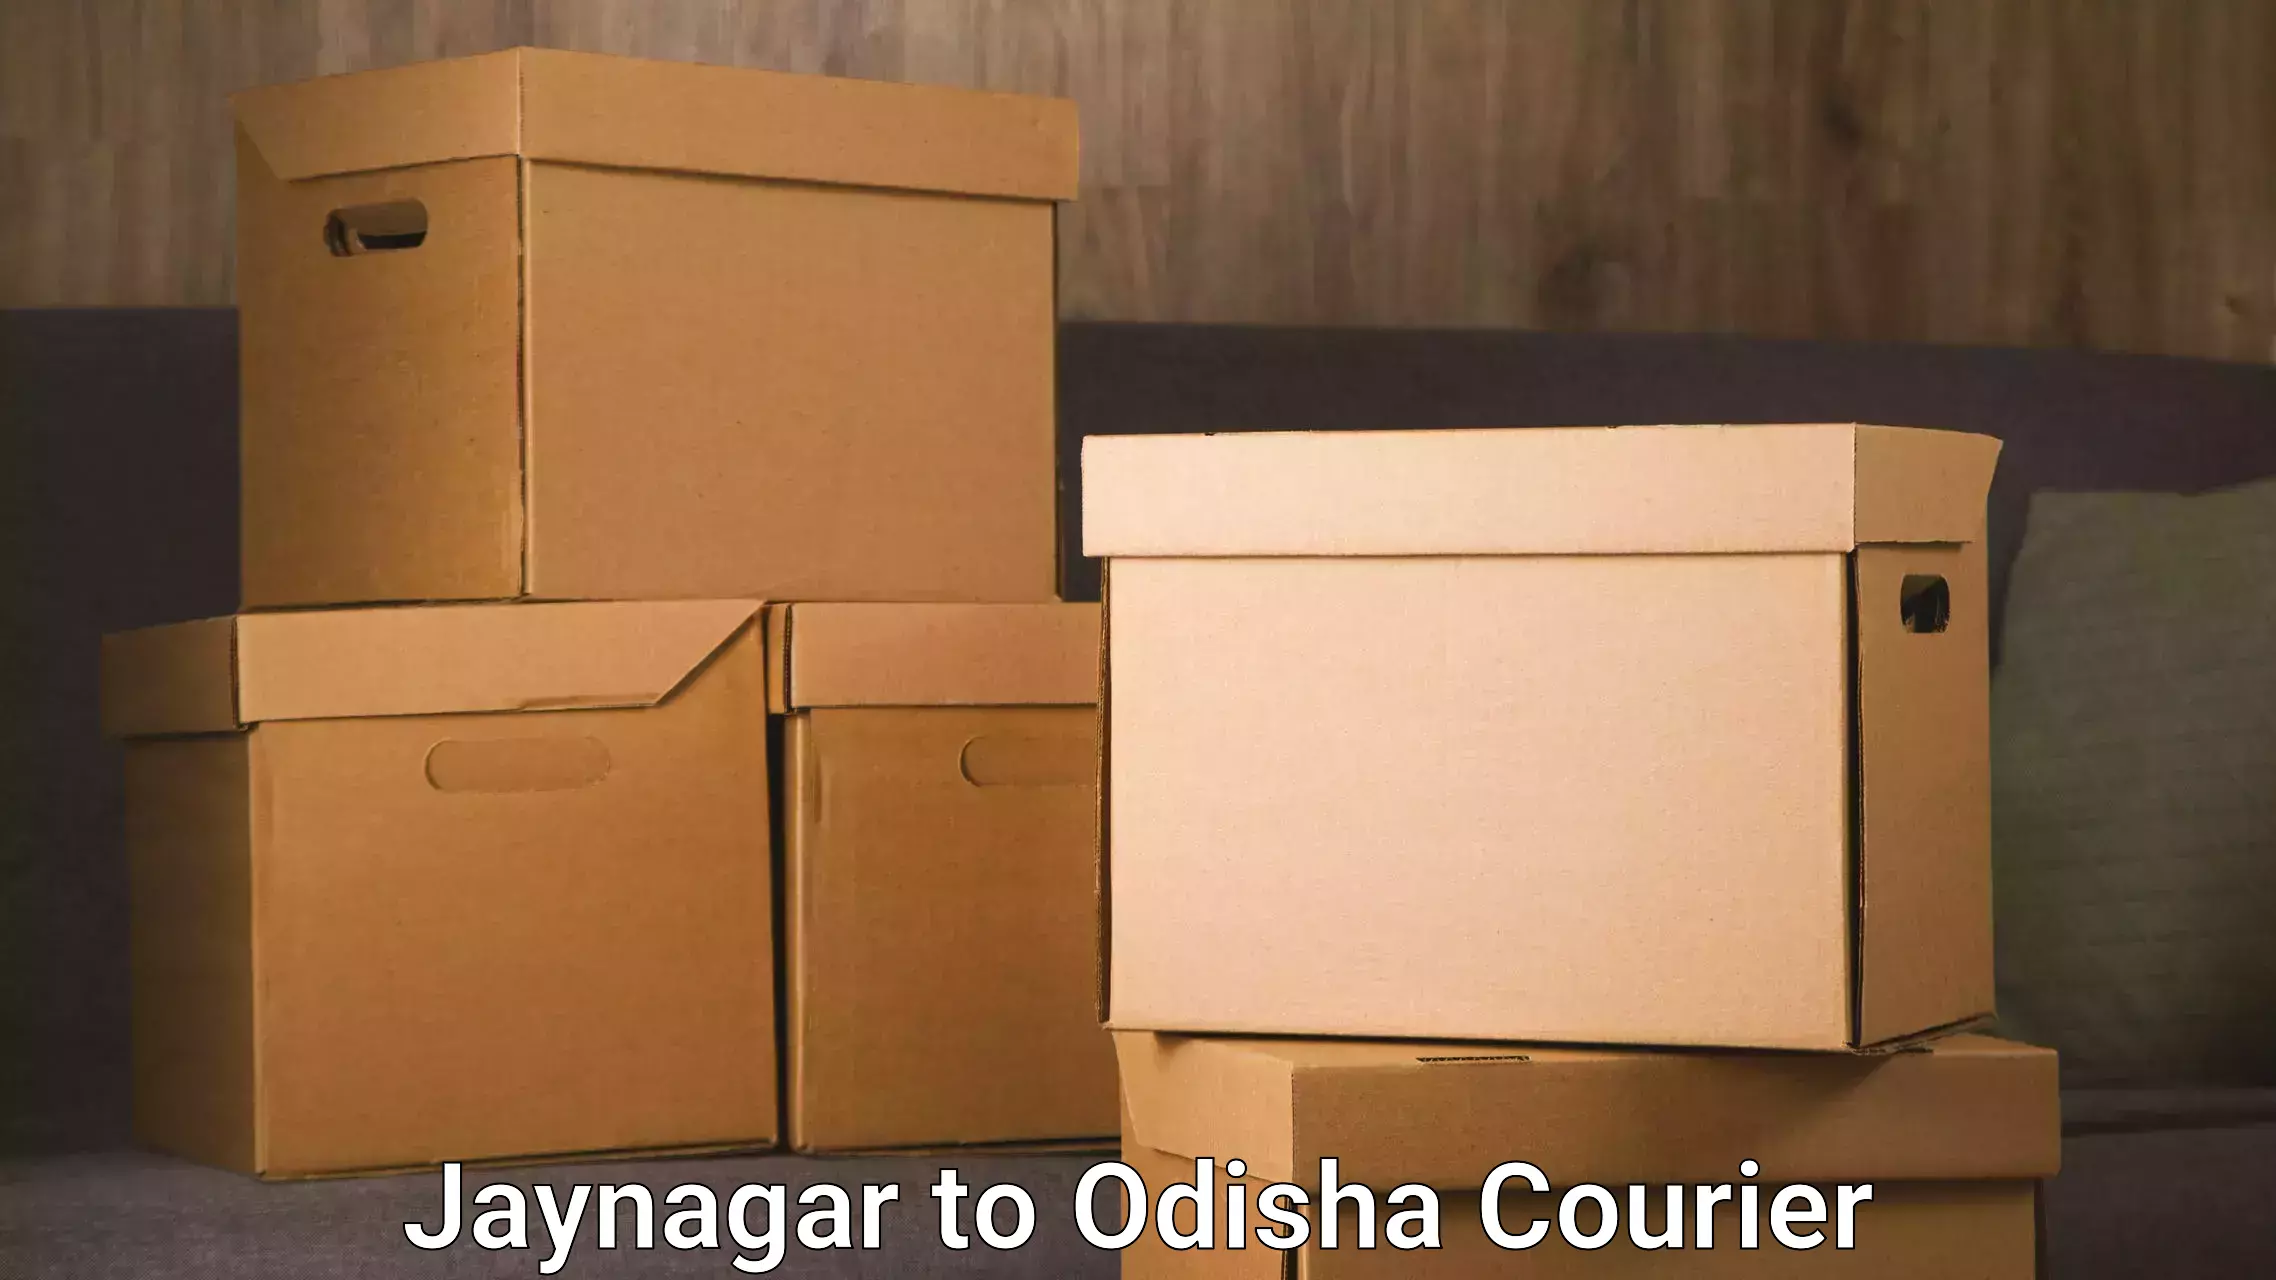 Trusted relocation experts Jaynagar to Odisha